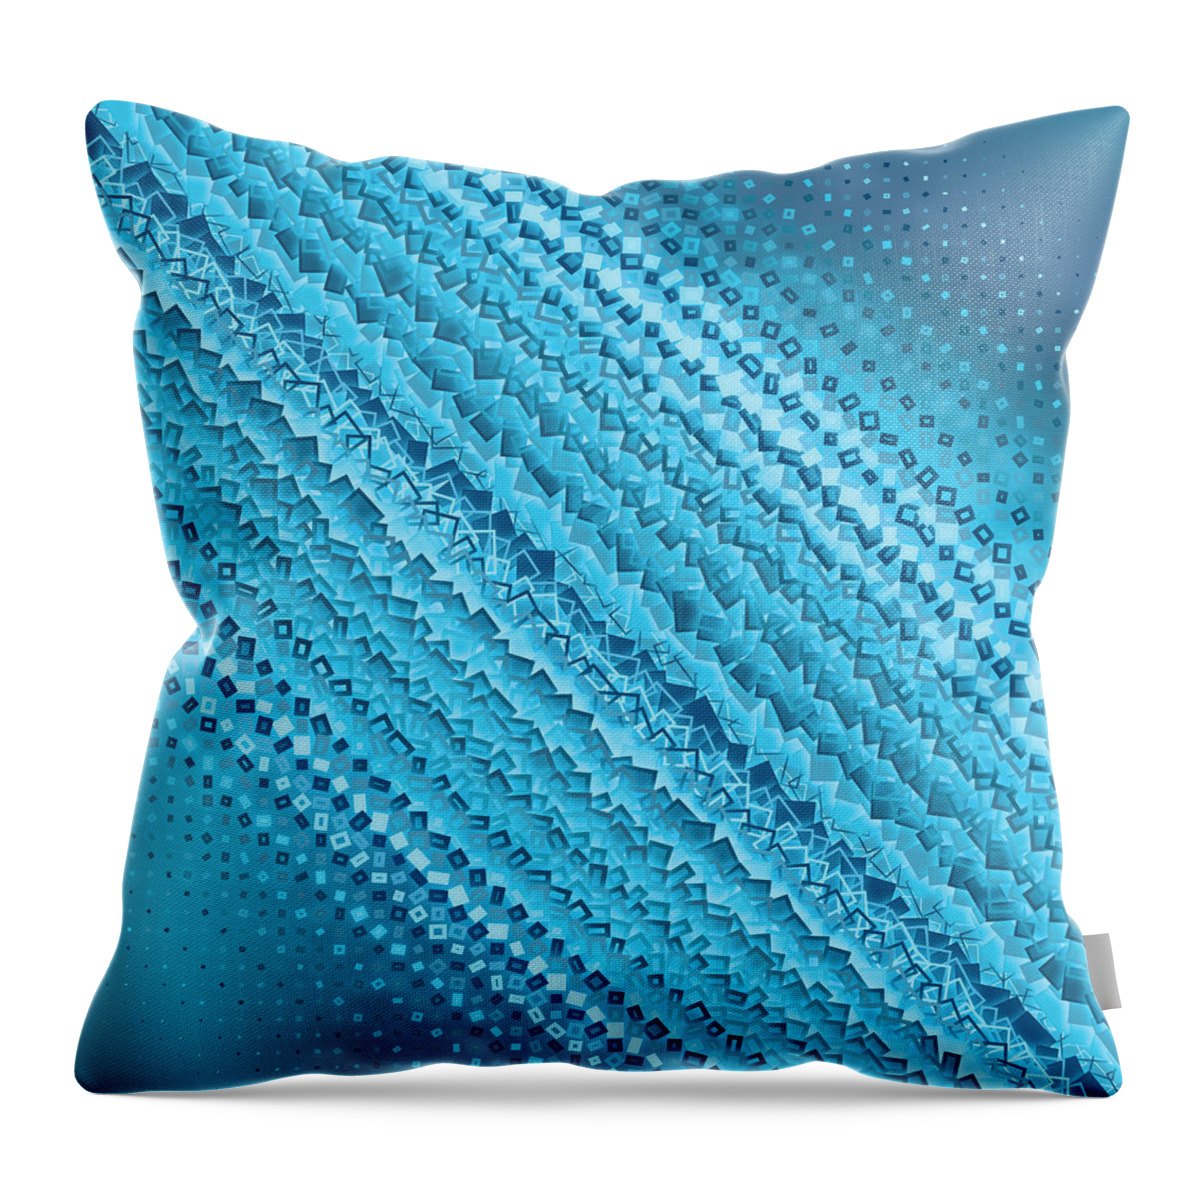 Abstract Throw Pillow featuring the digital art Pattern 14 by Marko Sabotin